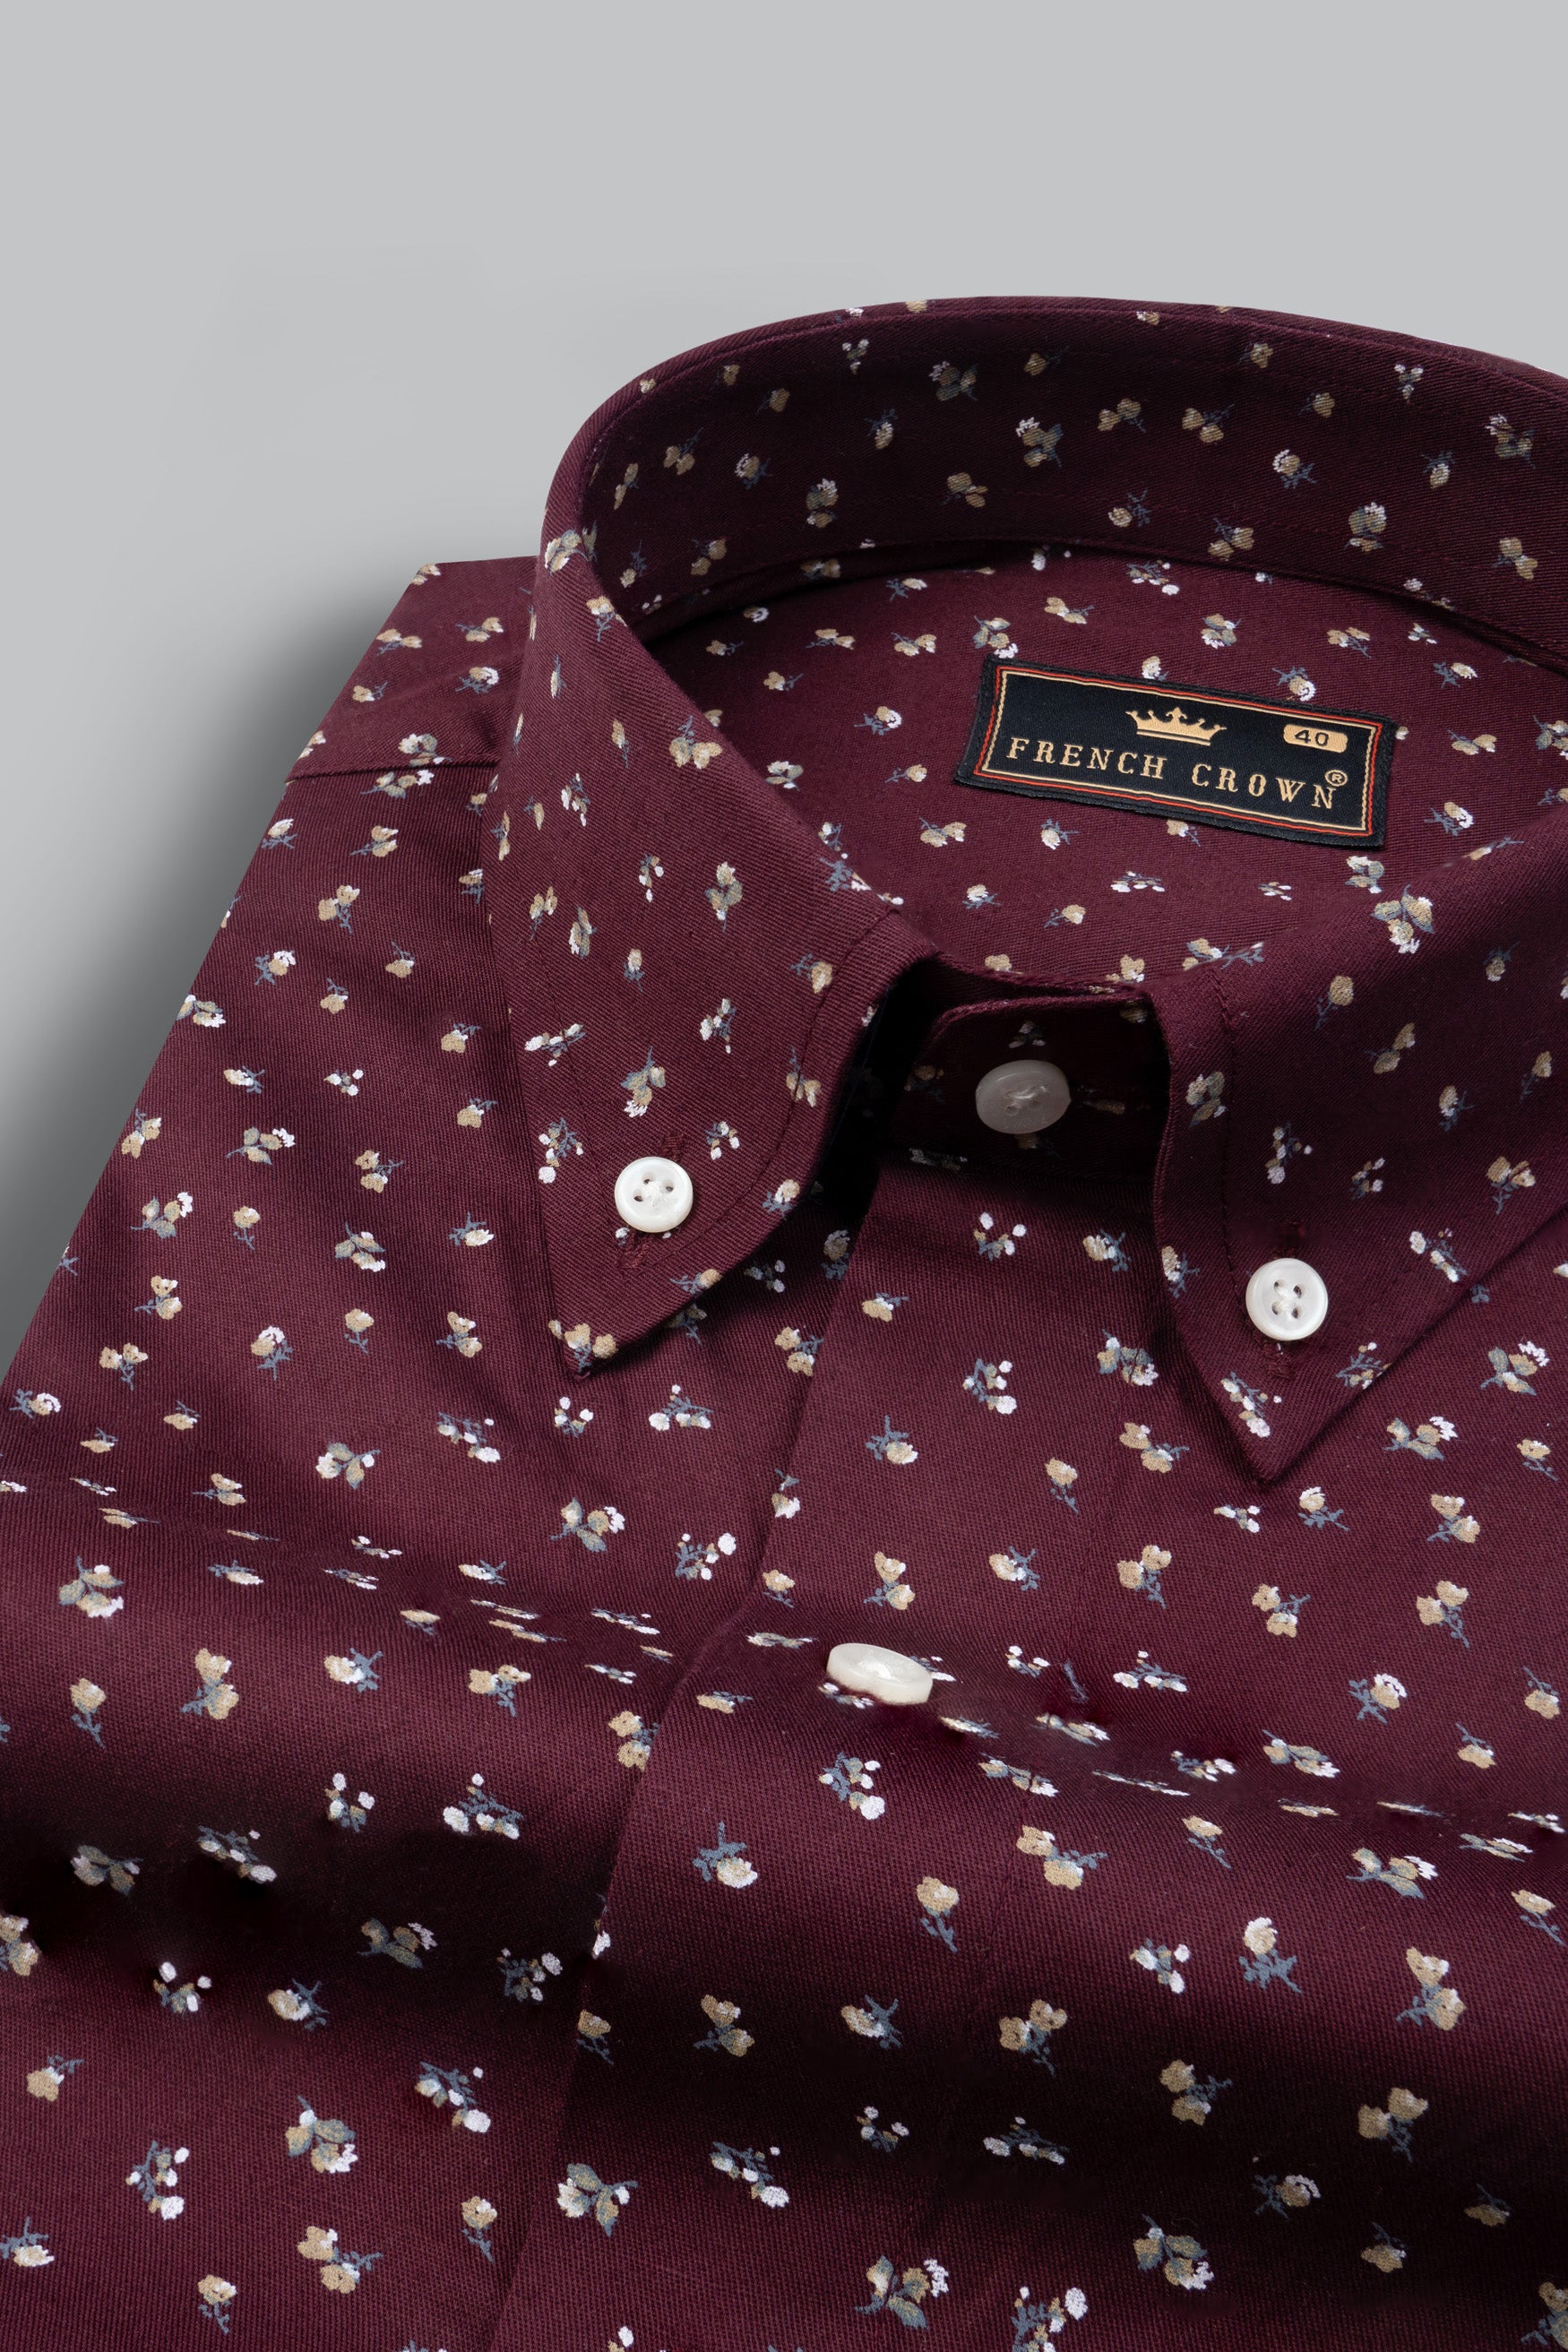 Wine Color with Ditsy Flower Printed Twill Premium Cotton Shirt 10264-BD-38, 10264-BD-H-38, 10264-BD-39, 10264-BD-H-39, 10264-BD-40, 10264-BD-H-40, 10264-BD-42, 10264-BD-H-42, 10264-BD-44, 10264-BD-H-44, 10264-BD-46, 10264-BD-H-46, 10264-BD-48, 10264-BD-H-48, 10264-BD-50, 10264-BD-H-50, 10264-BD-52, 10264-BD-H-52